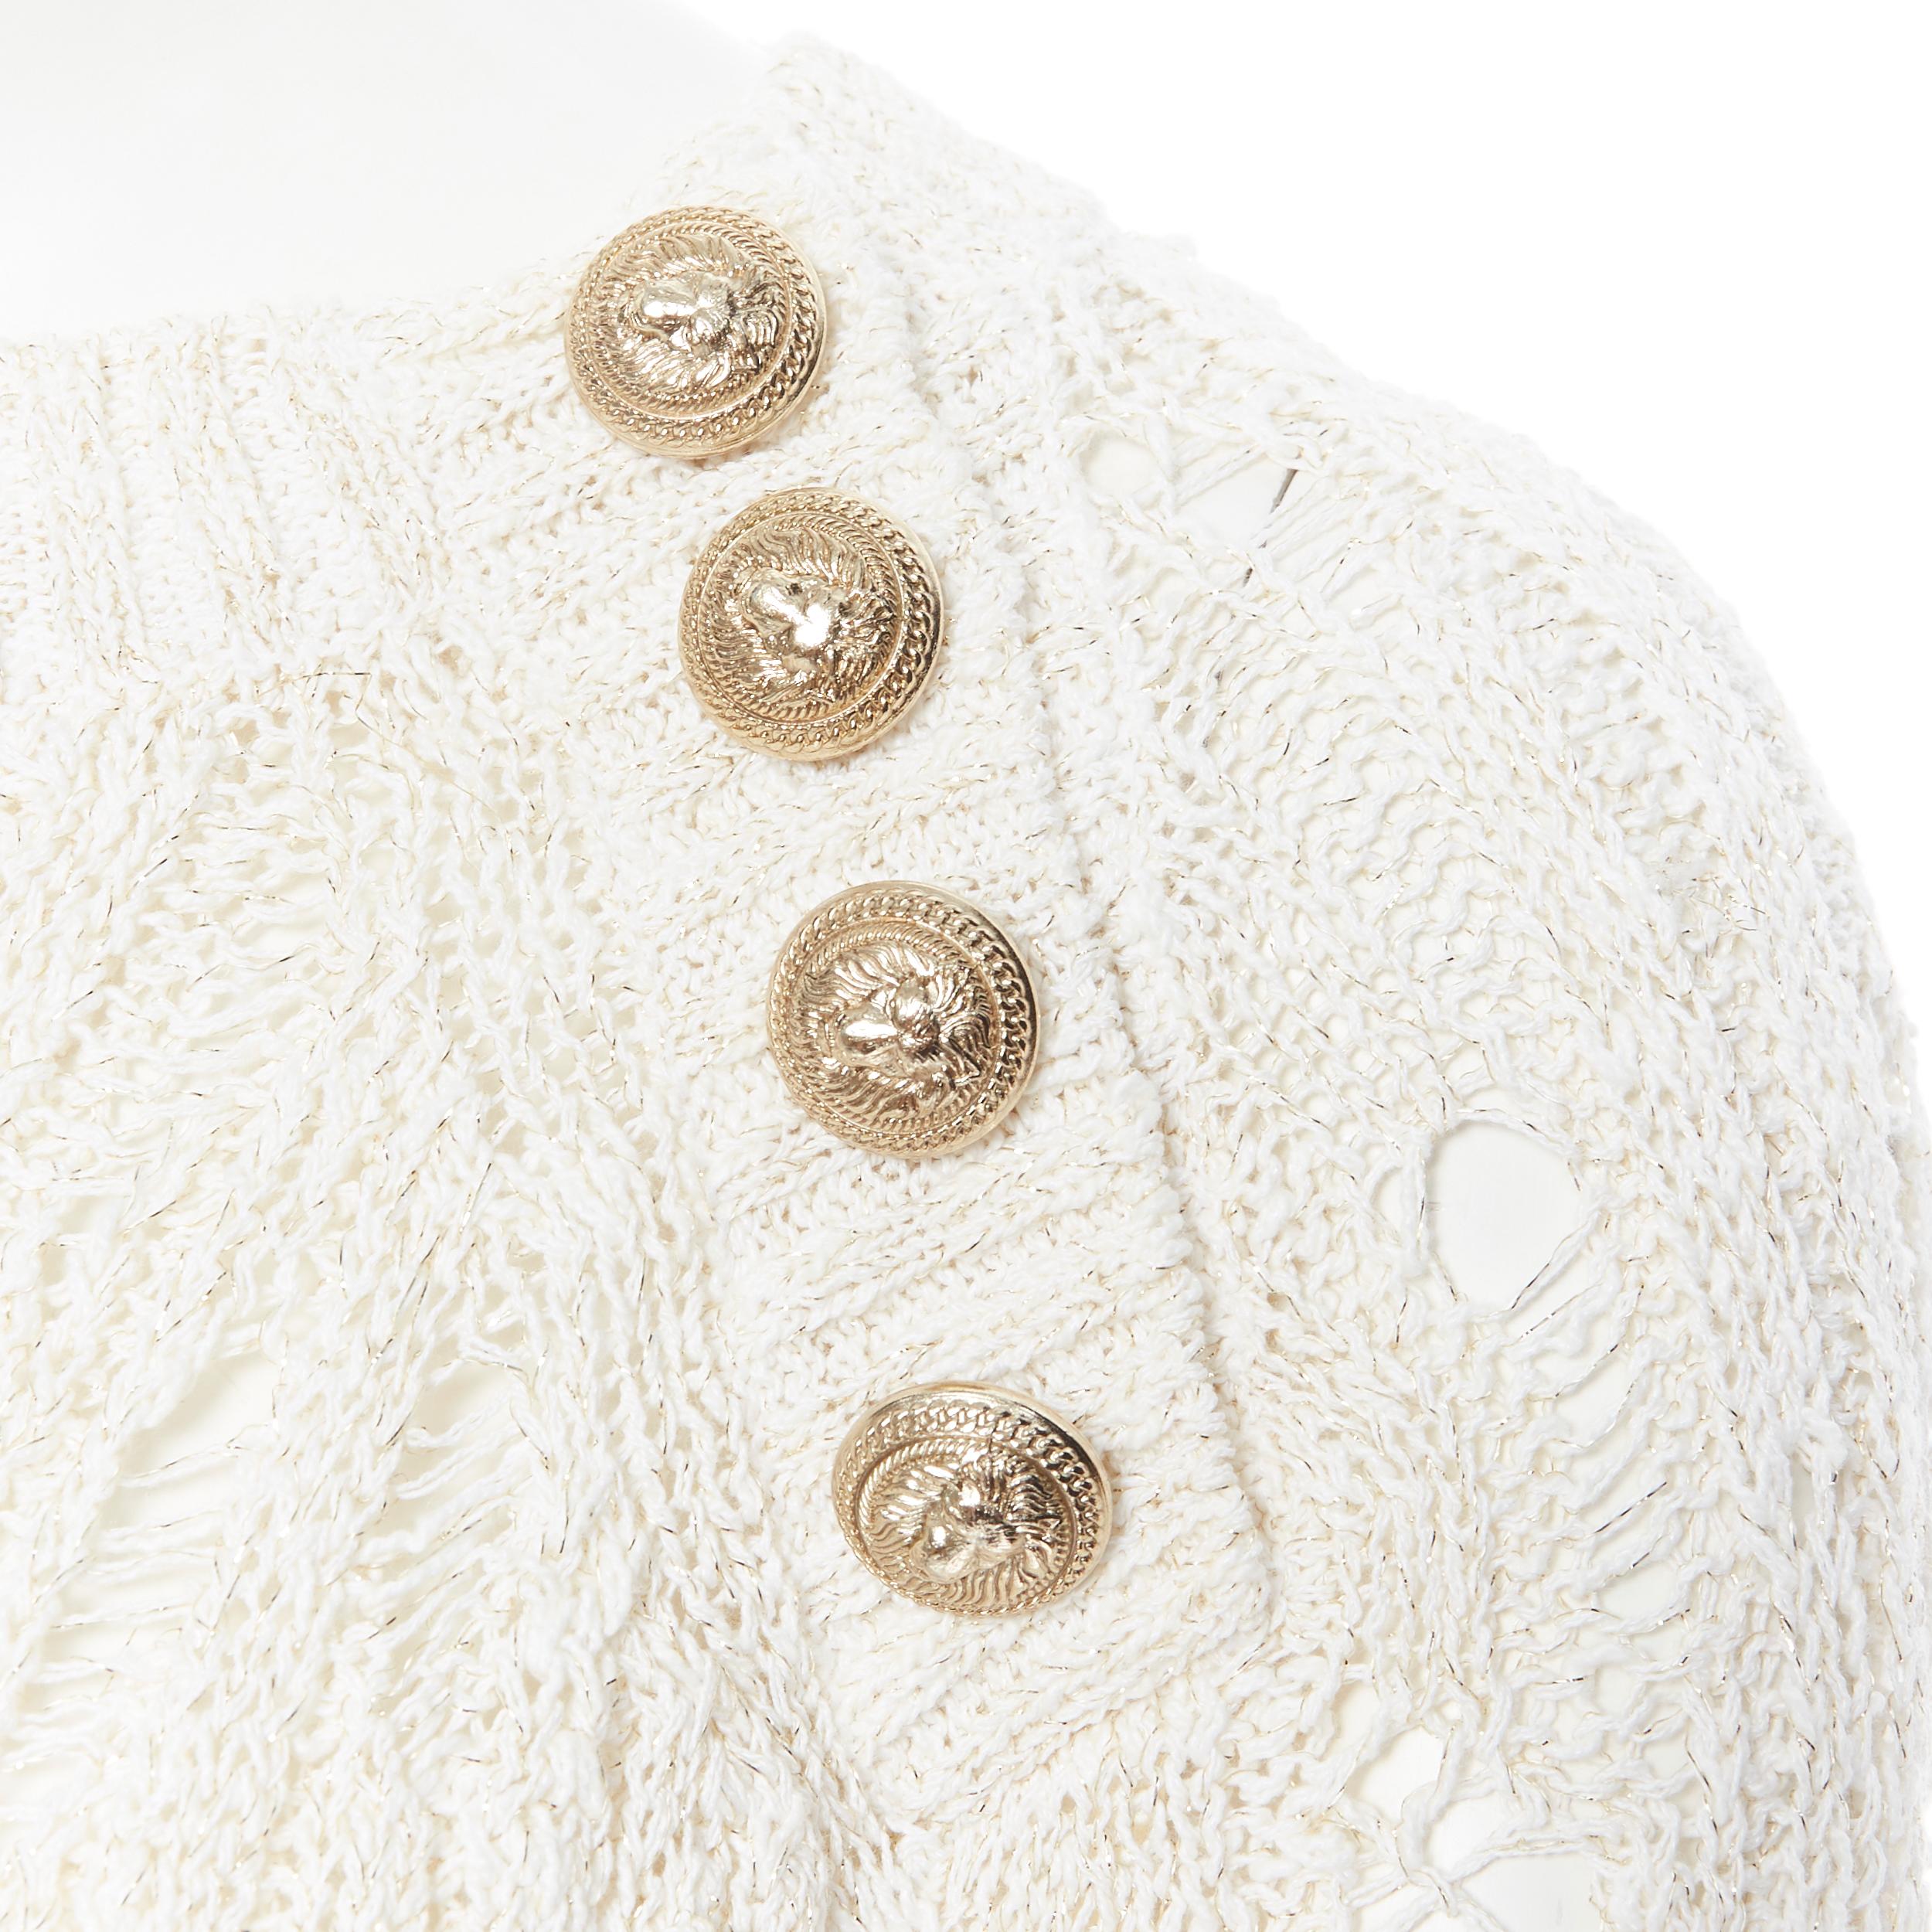 BALMAIN beige gold lurex loose holey knit military lion button sweater FR42 L
Brand: Balmain
Designer: Olivier Rousteing
Model Name / Style: Loose knit sweater
Material: Cotton blend
Color: Beige
Pattern: Solid
Extra Detail: Cotton blend. Beige with